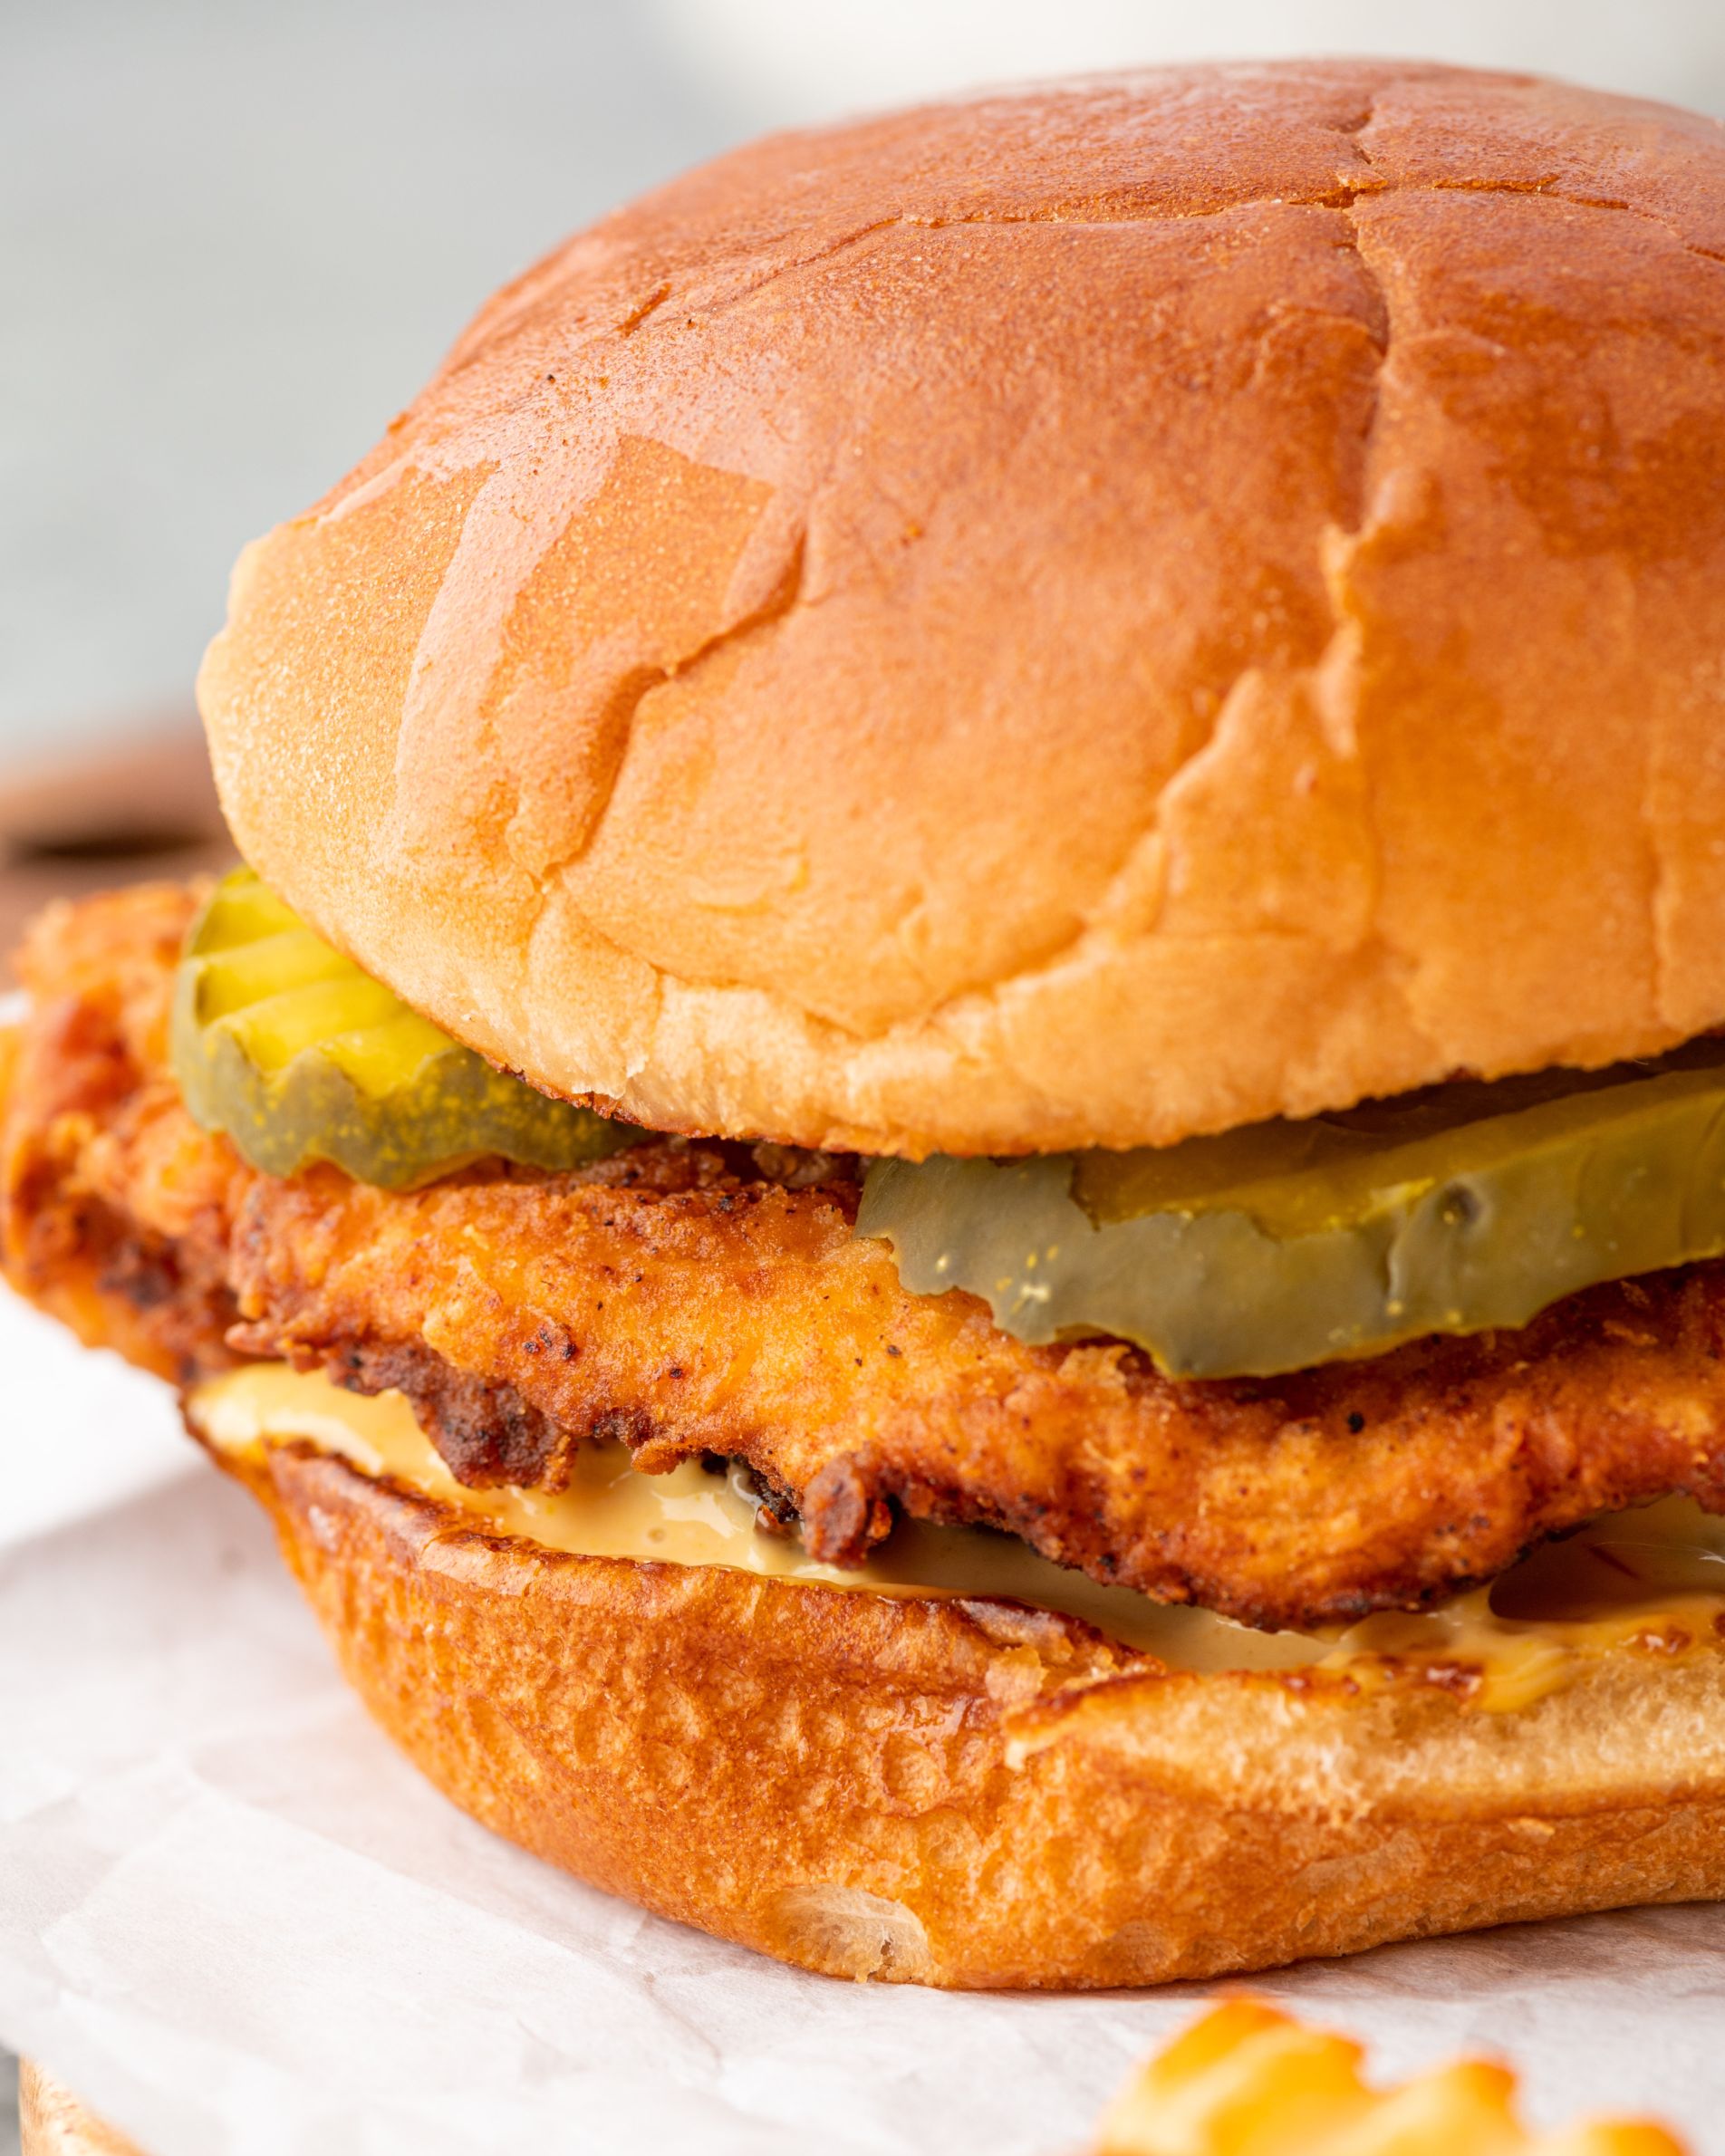 Crispy chicken sitting between hamburger buns with sauce and pickles.